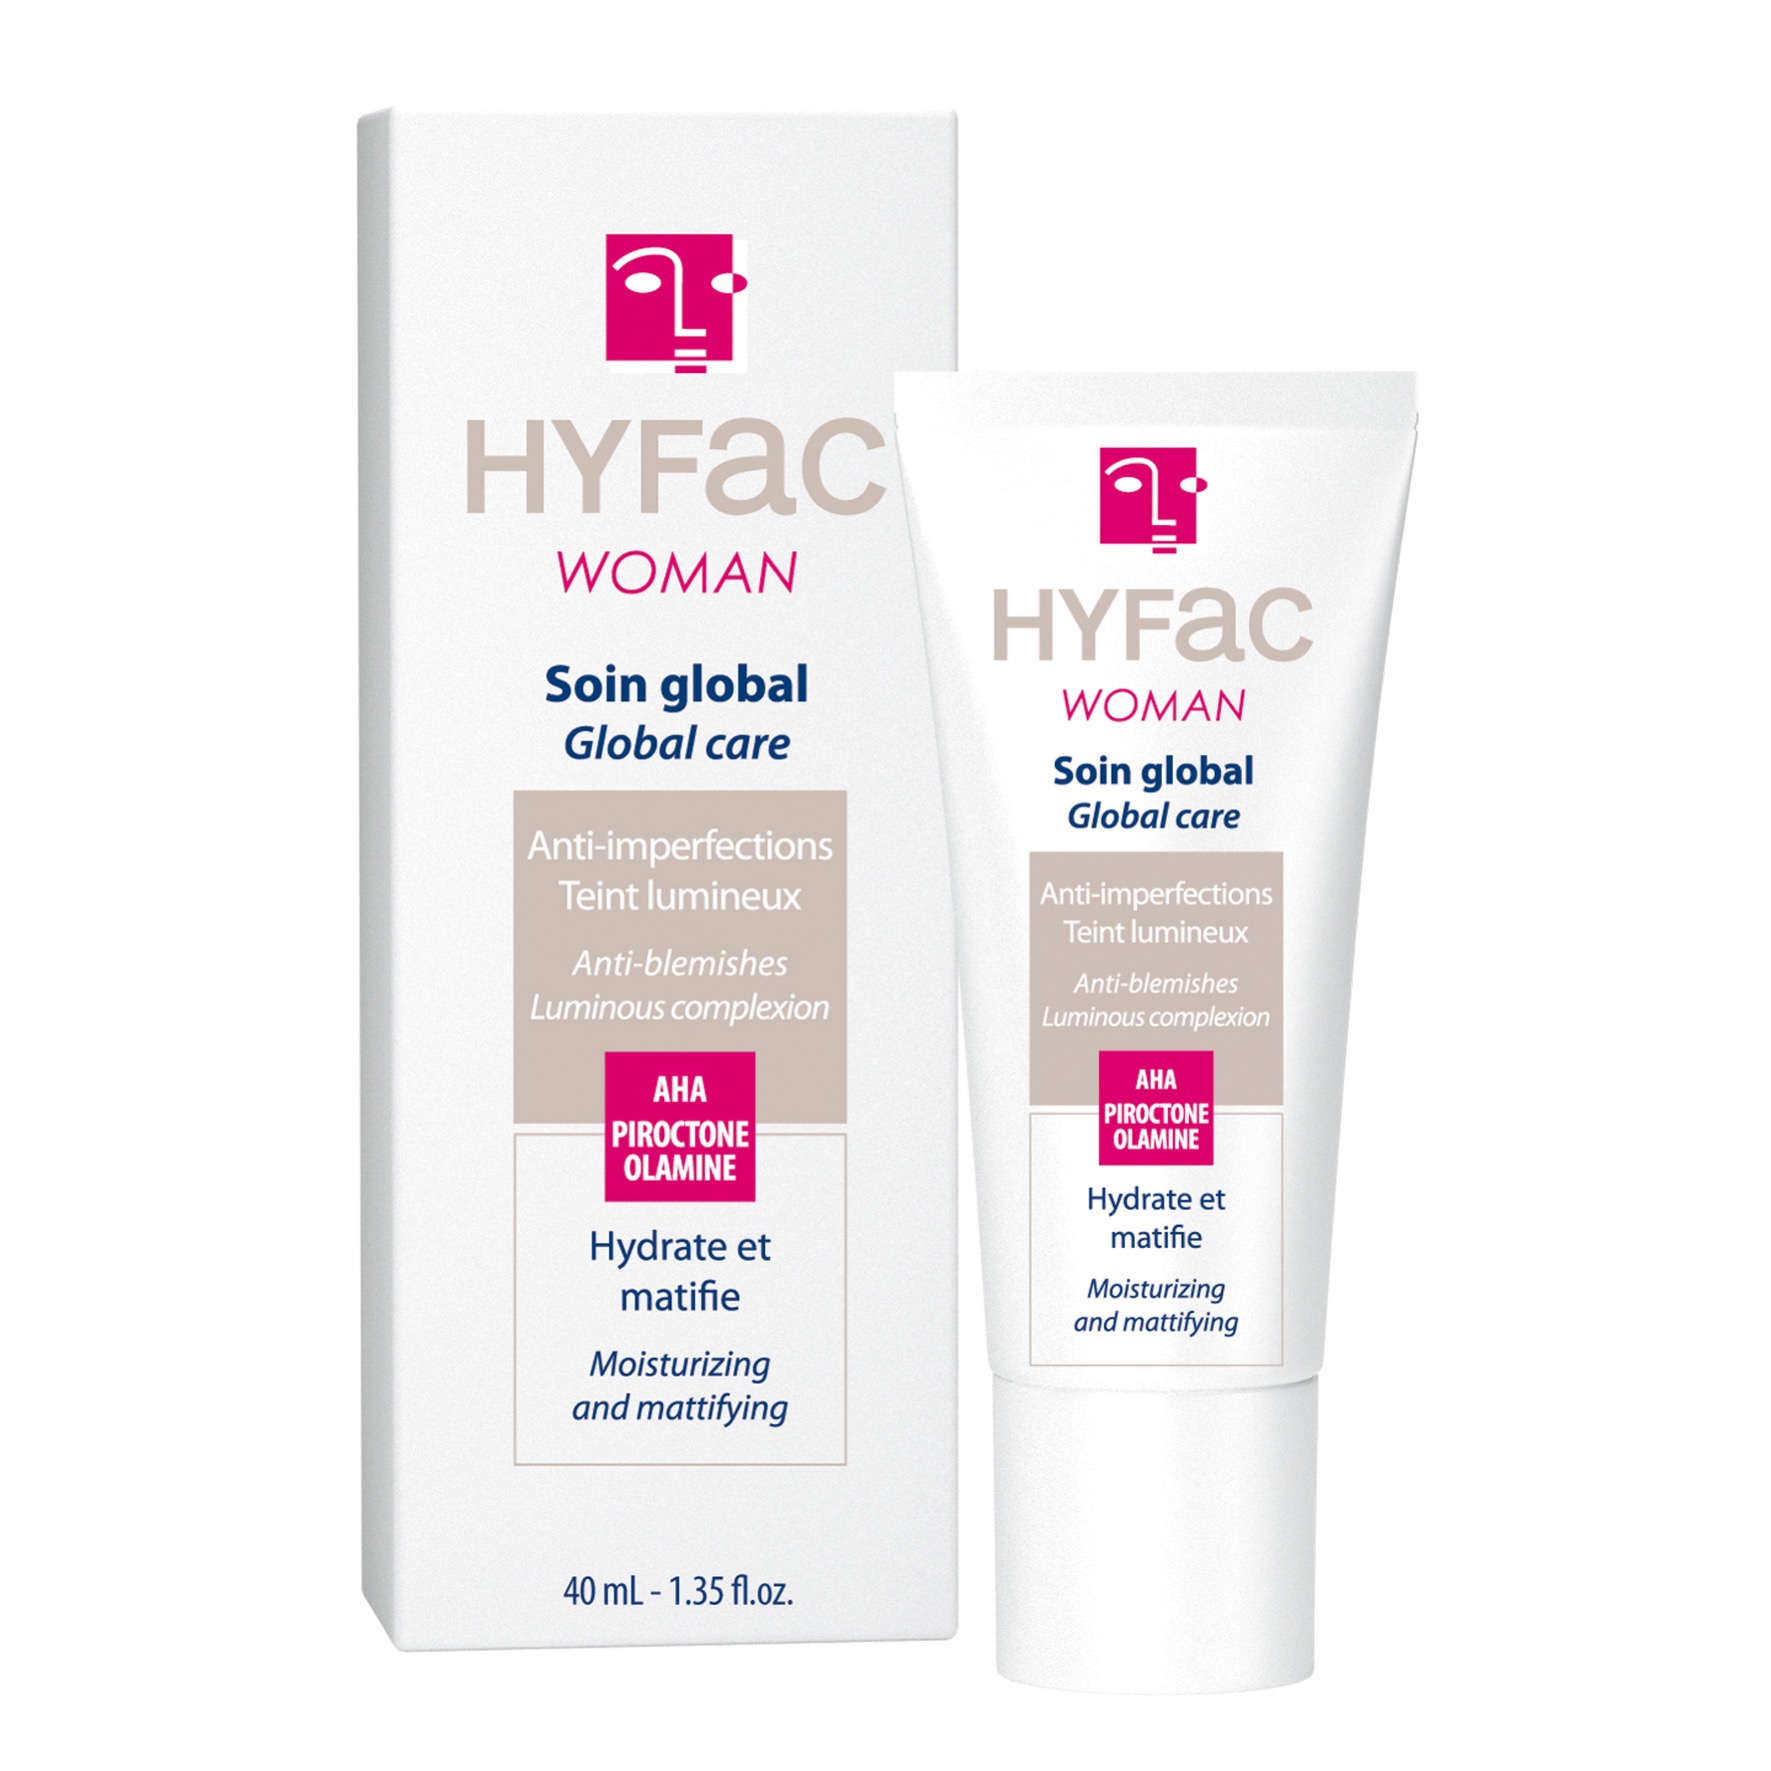 HYFAC WOMAN soin global anti-imperfections acné femme